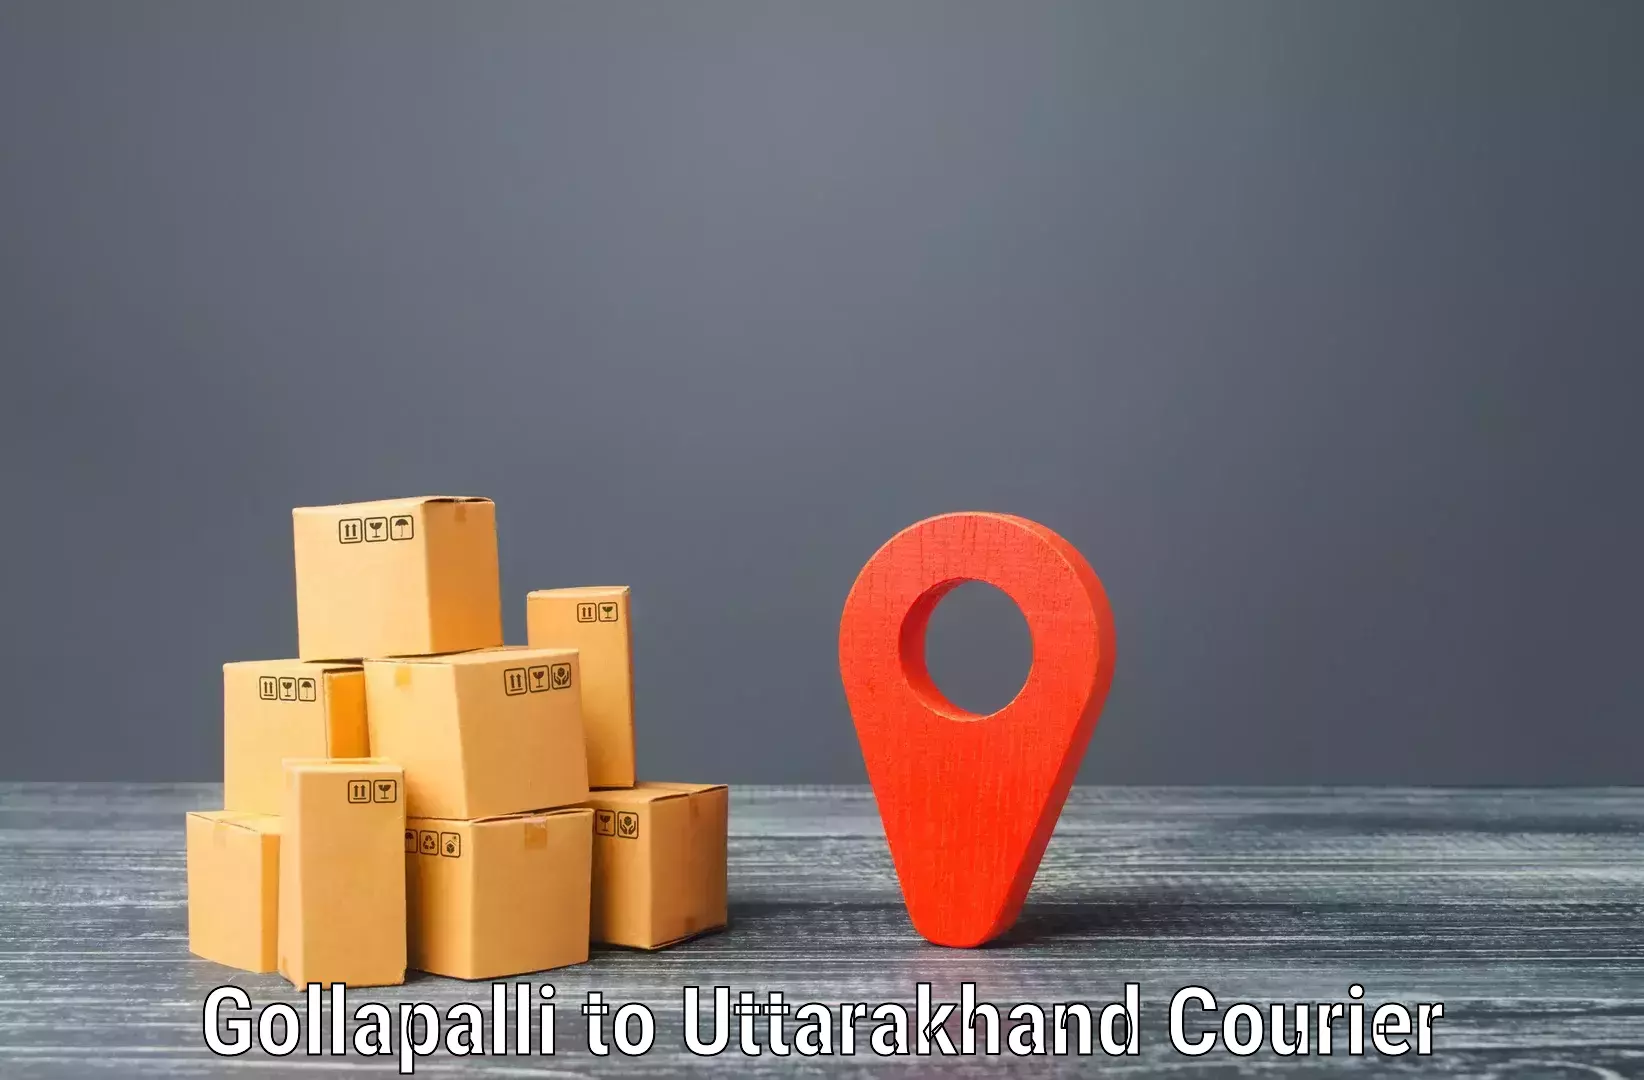 Automated parcel services Gollapalli to Herbertpur